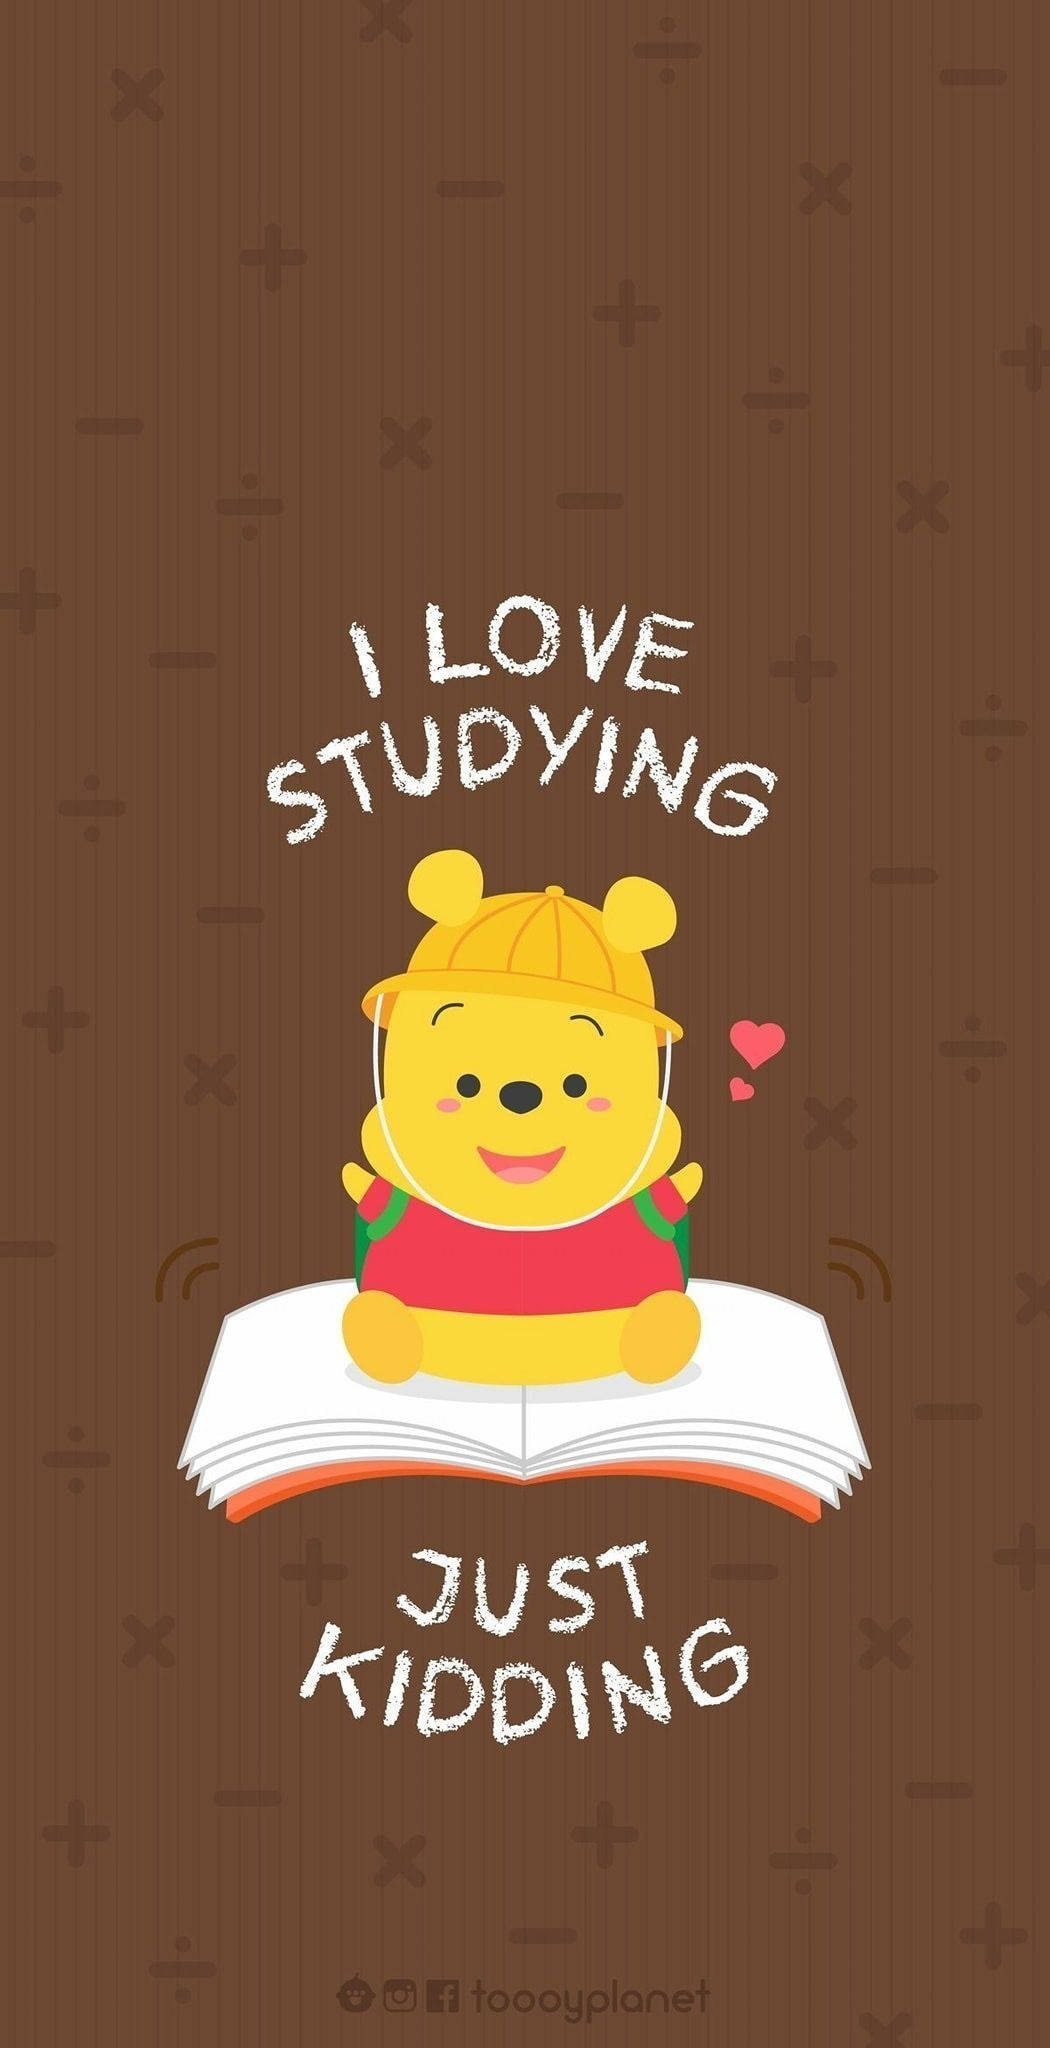 Download Cute Winnie The Pooh Iphone Love Studying Kidding Wallpaper |  